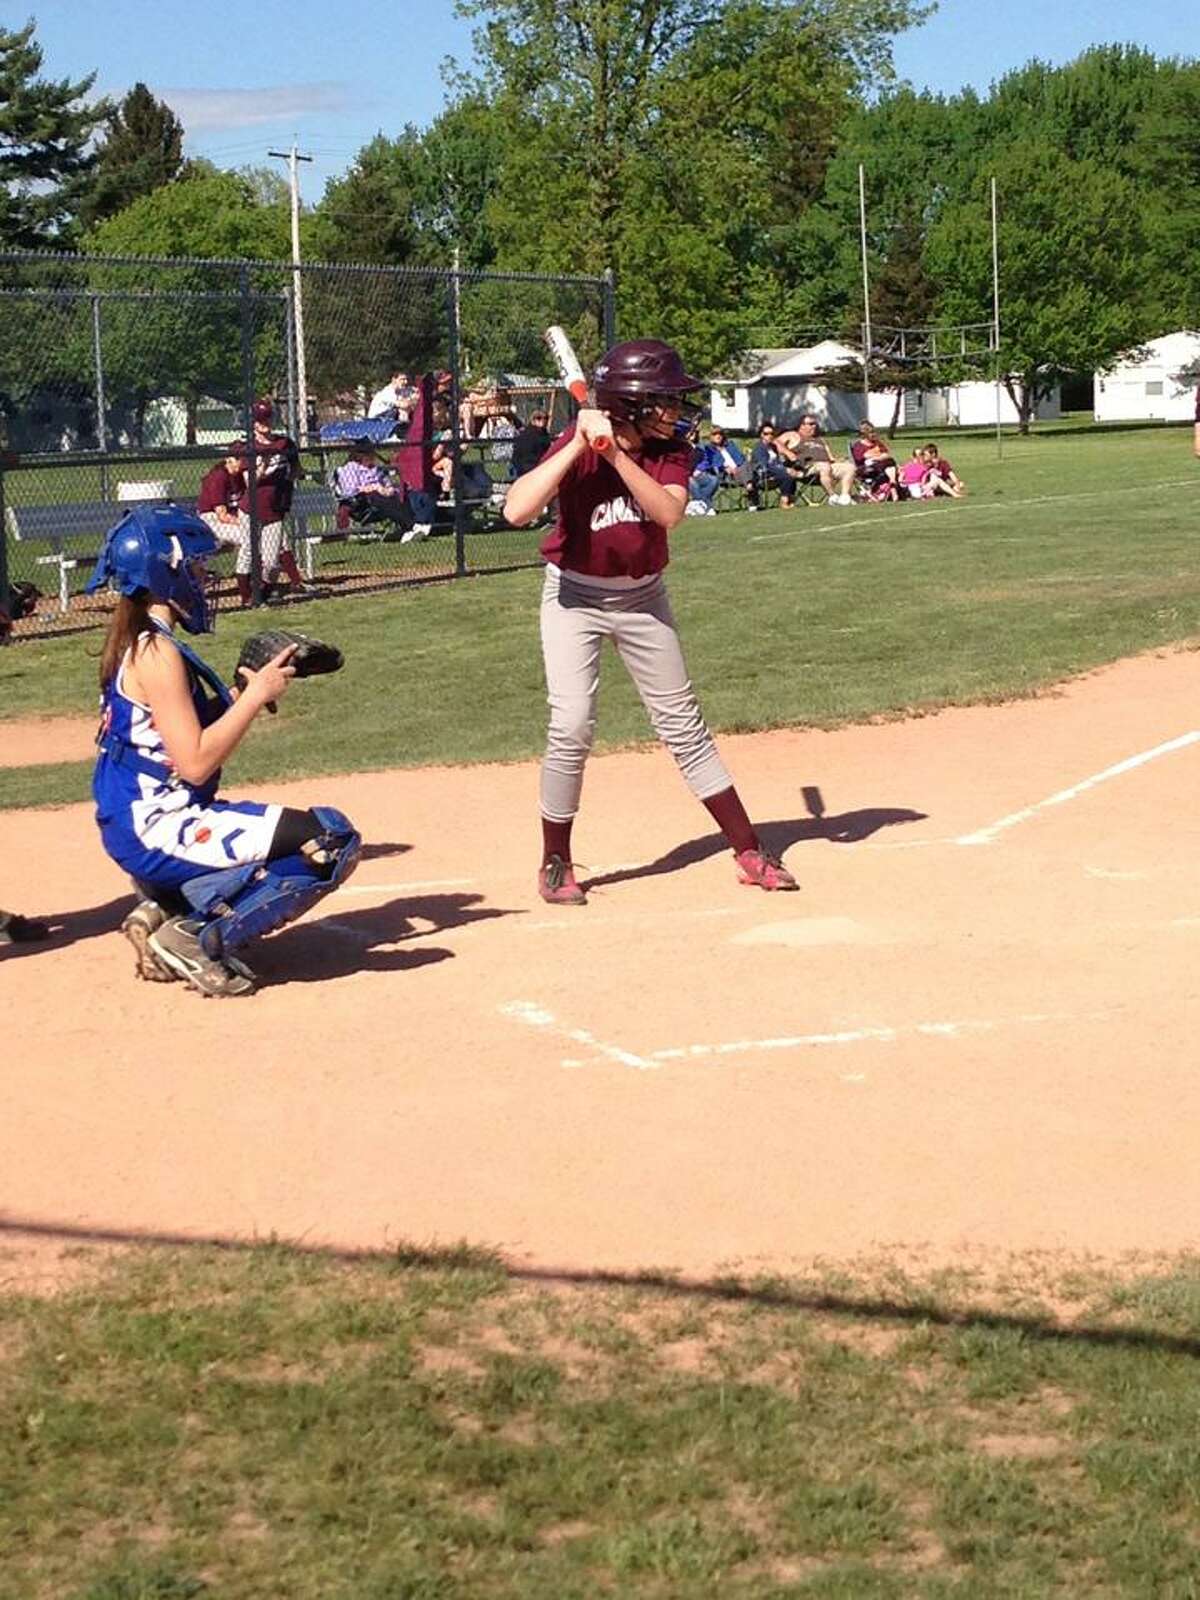 Amanda Seef/Special to the Oneida Daily Dispatch Emily Simmons steps up to the plate for Canastota's modified softball team Sunday, May 19, 2013. Her team played against New York Mills. A year ago, Emily was in a car accident that left her comatose for two months. Now she's back to school and back on the field, living each day as it comes.